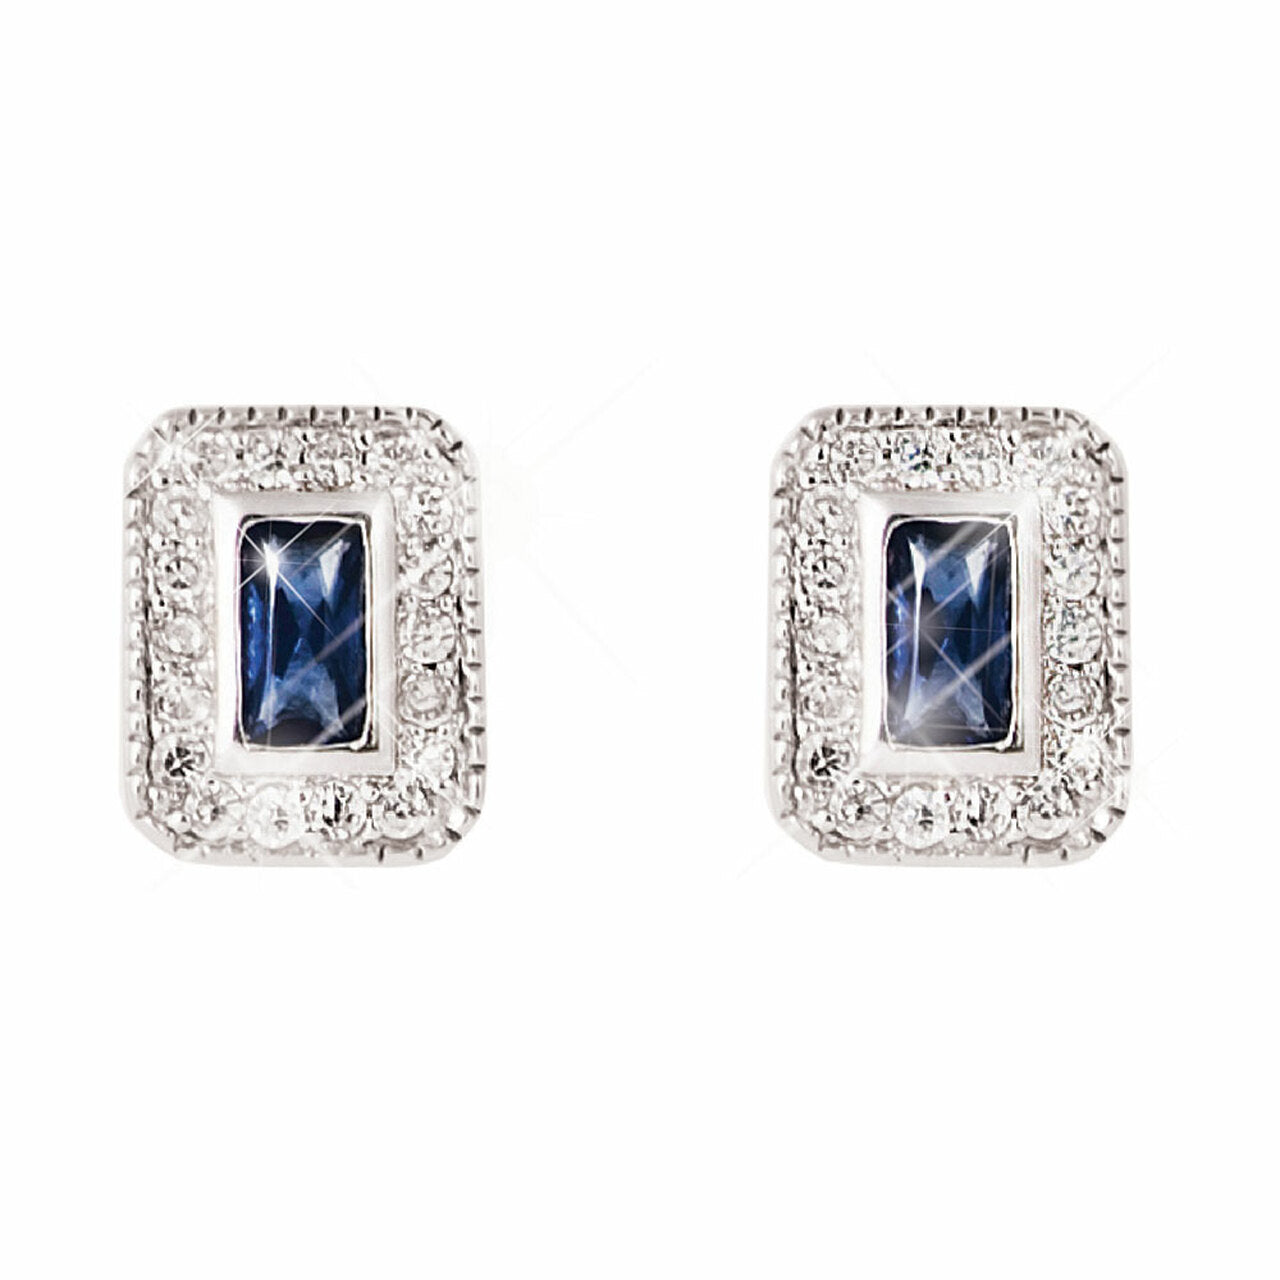 Tipperary Crystal Silver Stud Earrings Sapphire Centre White Surround  Elegance and pizzaz are presented in equal measure with these rich sapphire earrings. The halo frame of bright, round, clear crystals intensiﬁes the radiance of the blue emerald cut center stone.